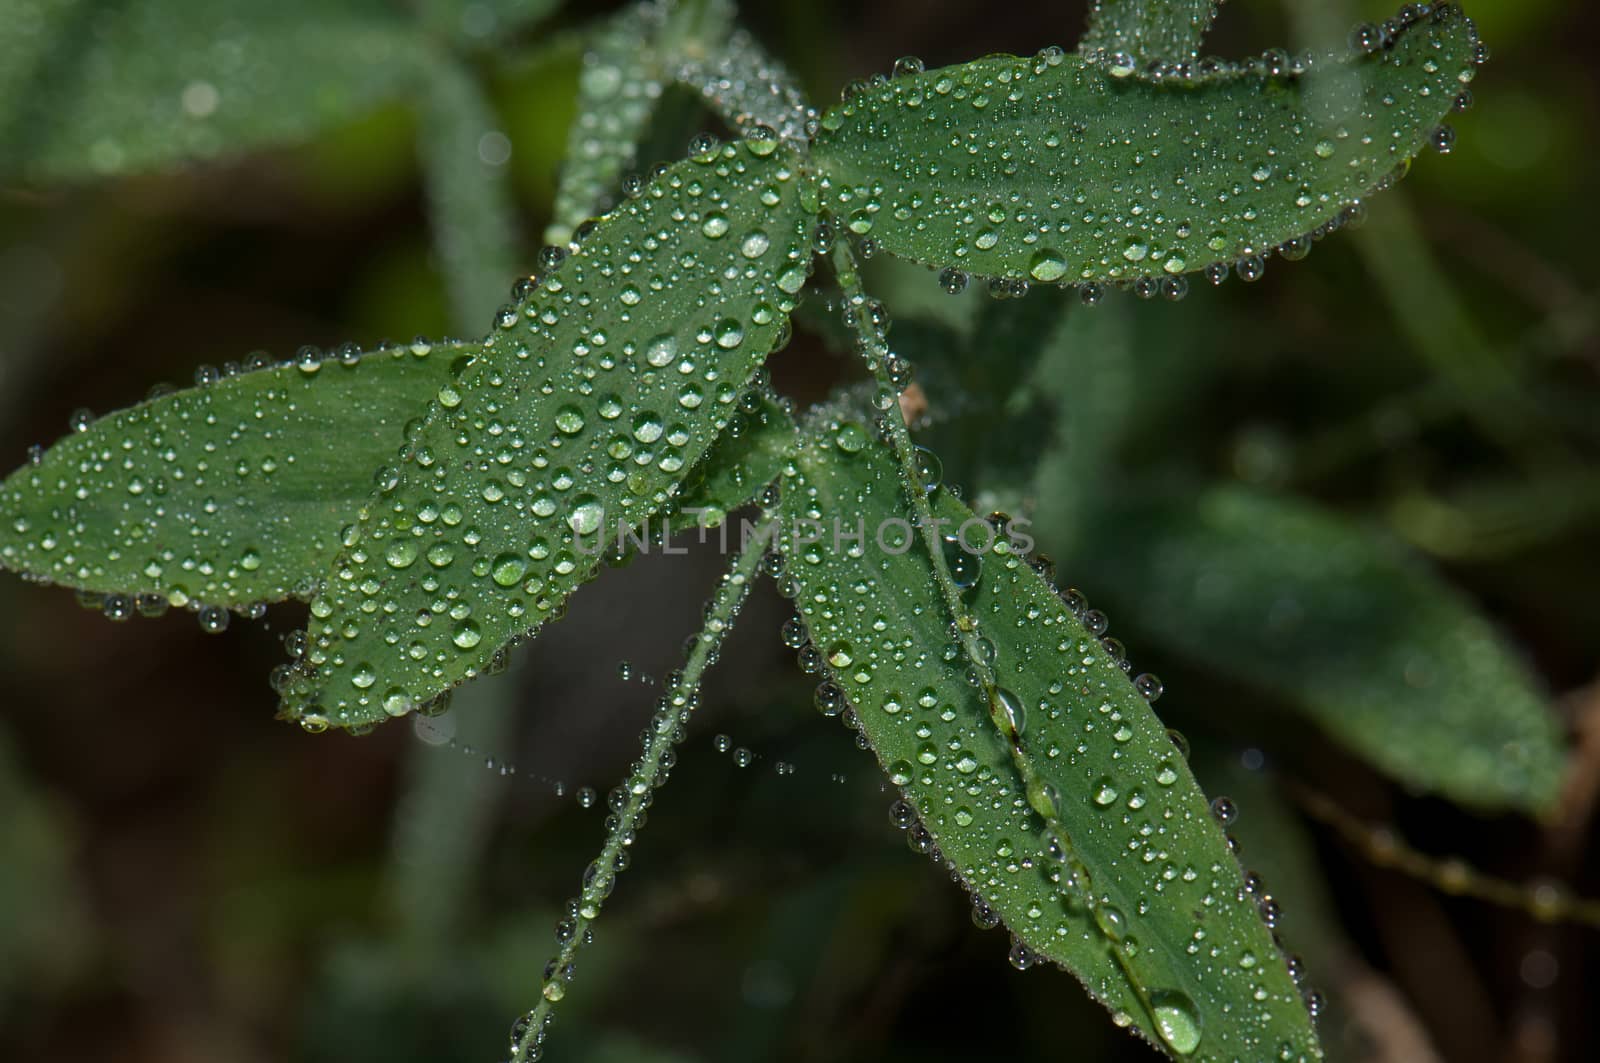 Leaves covered with dew drops. by VictorSuarez